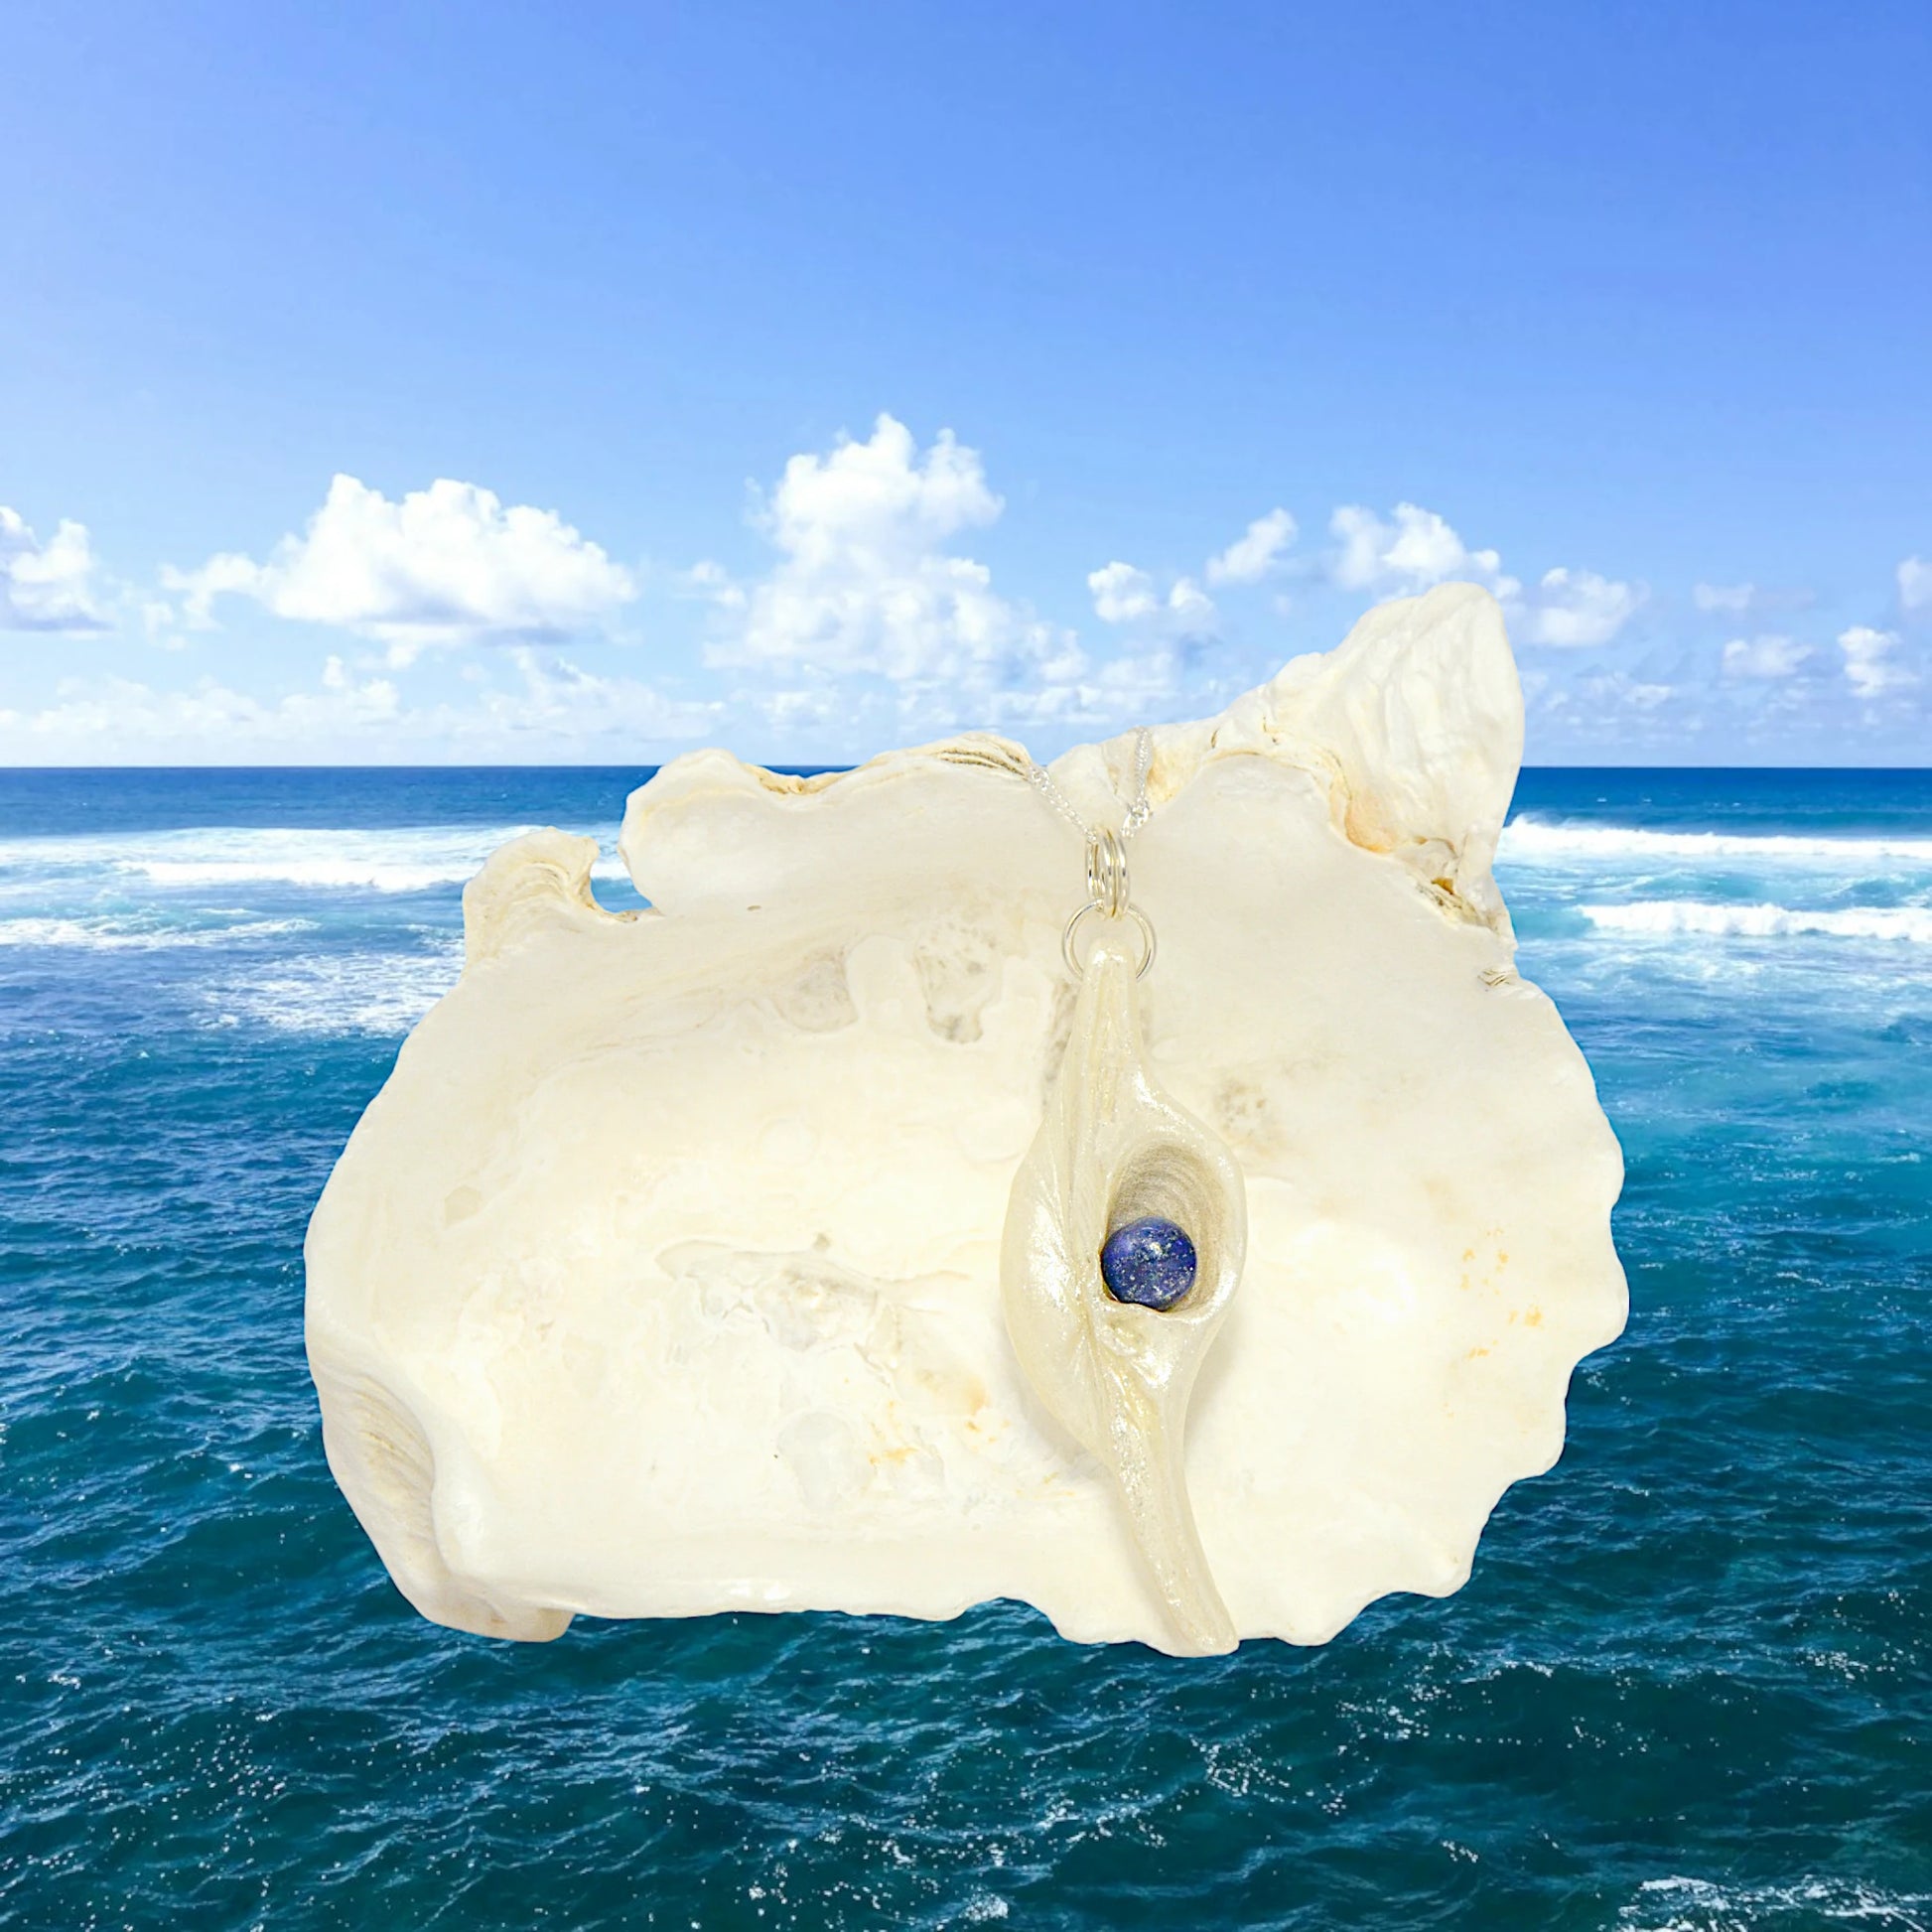 Vision is a natural seashell pendant with a Lapis Lazuli gemstone.  The ocean waves are in the background.